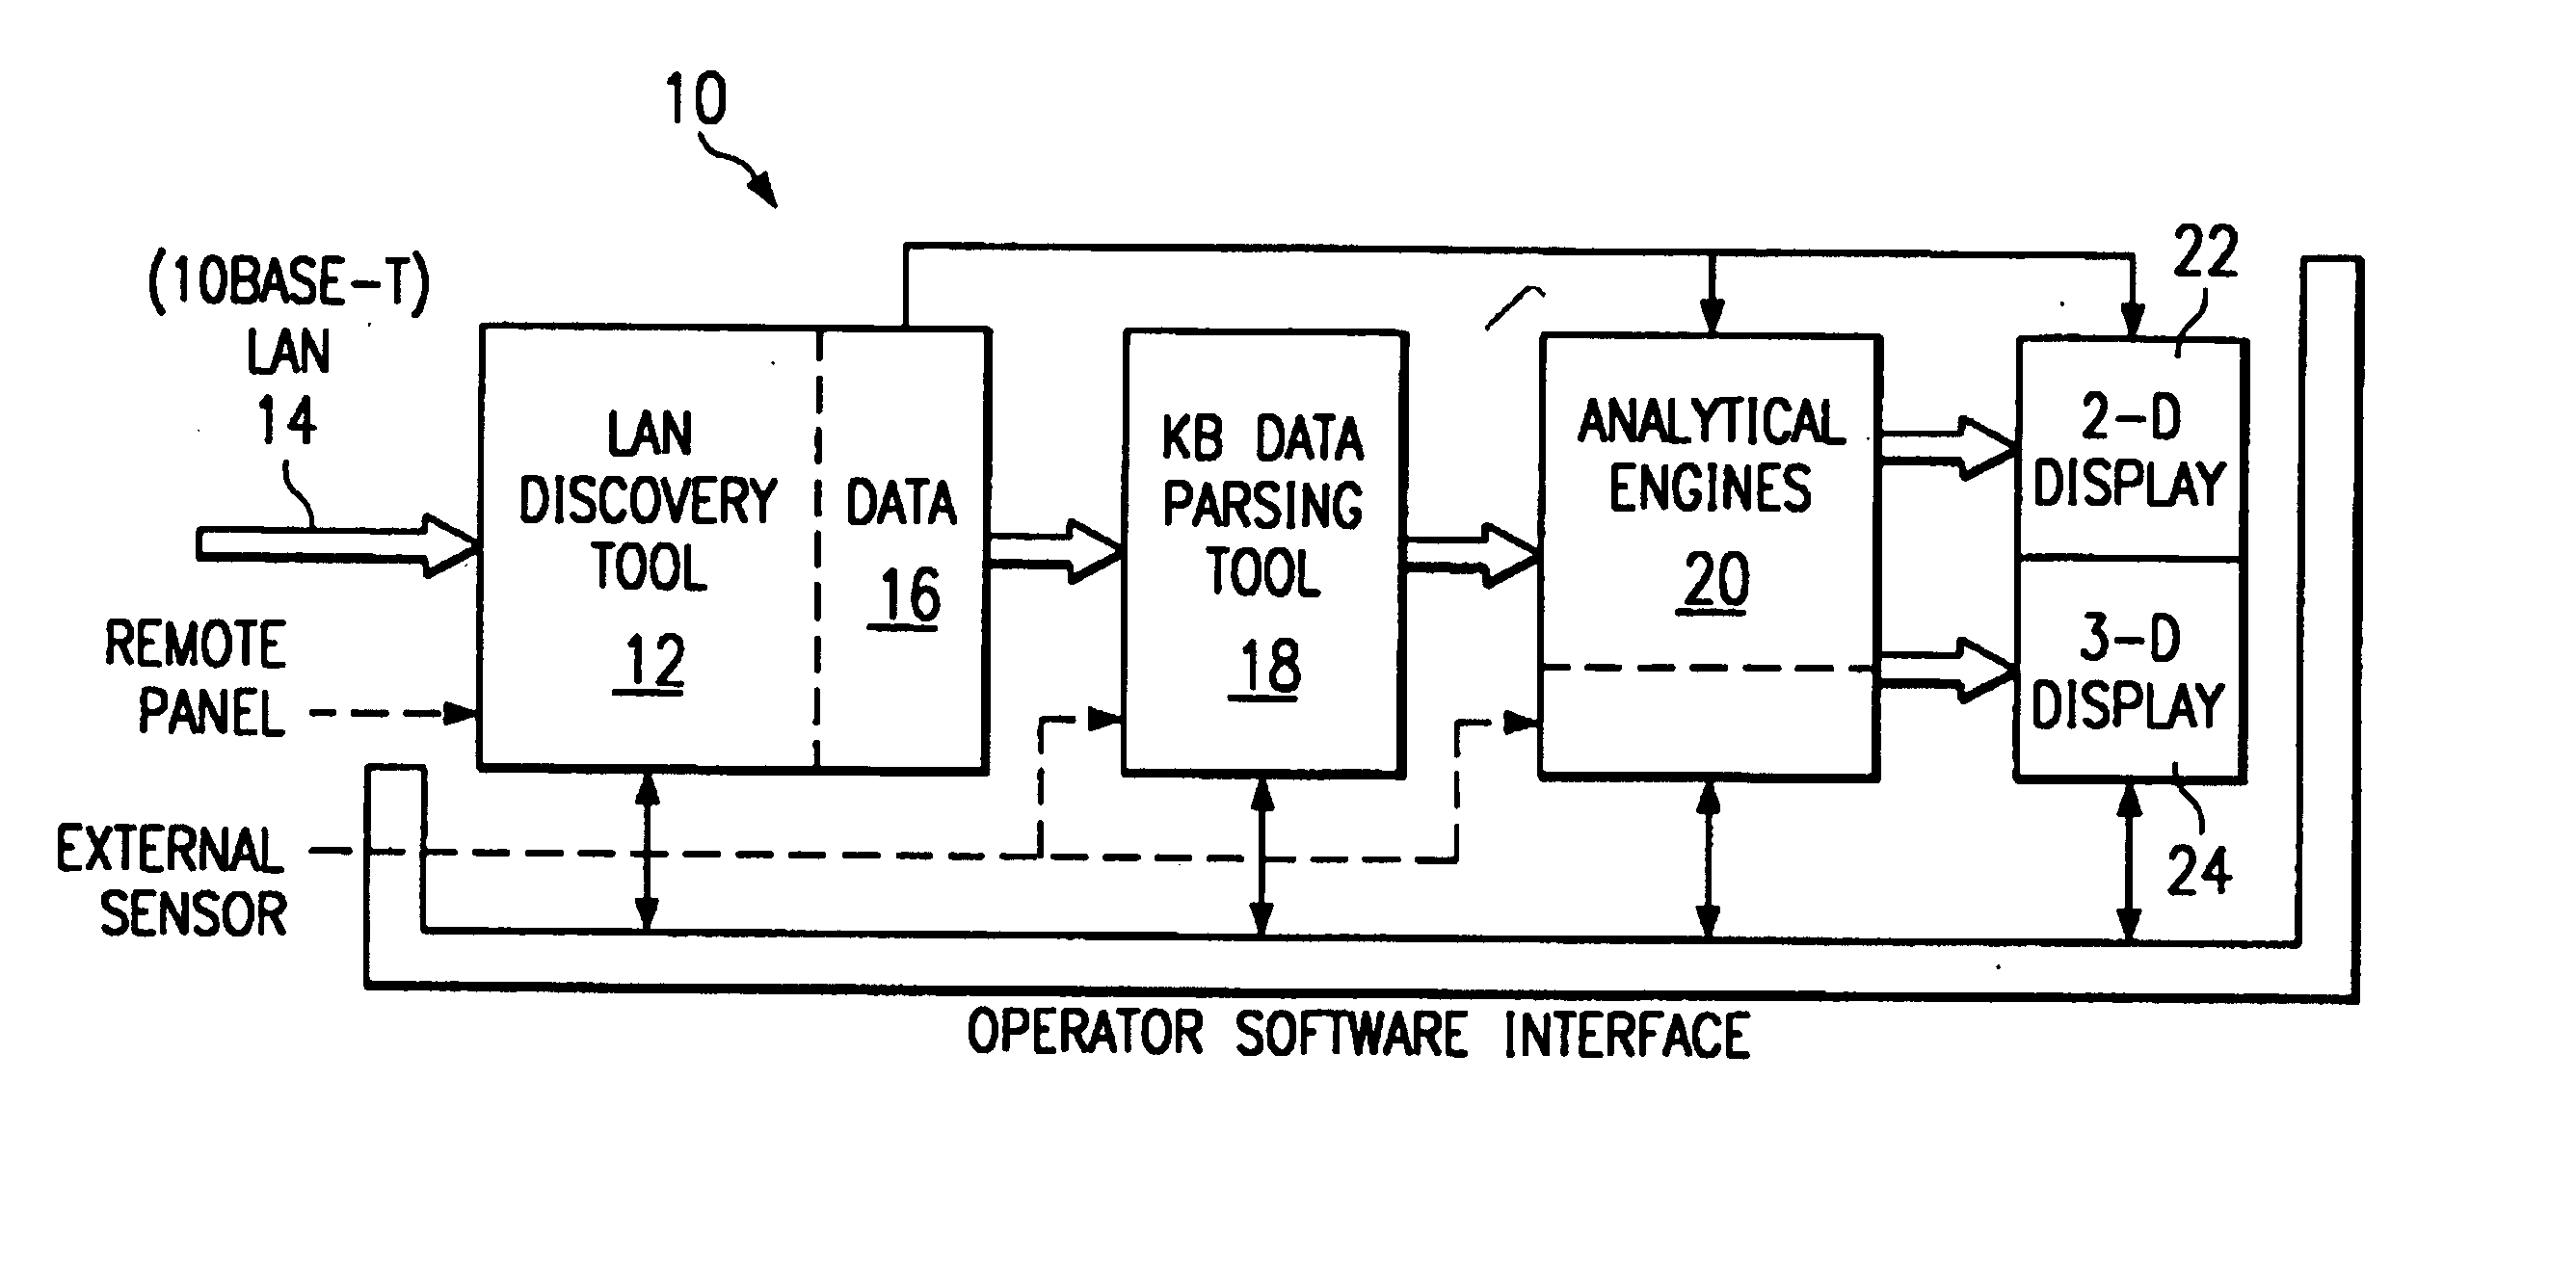 Information security analysis system